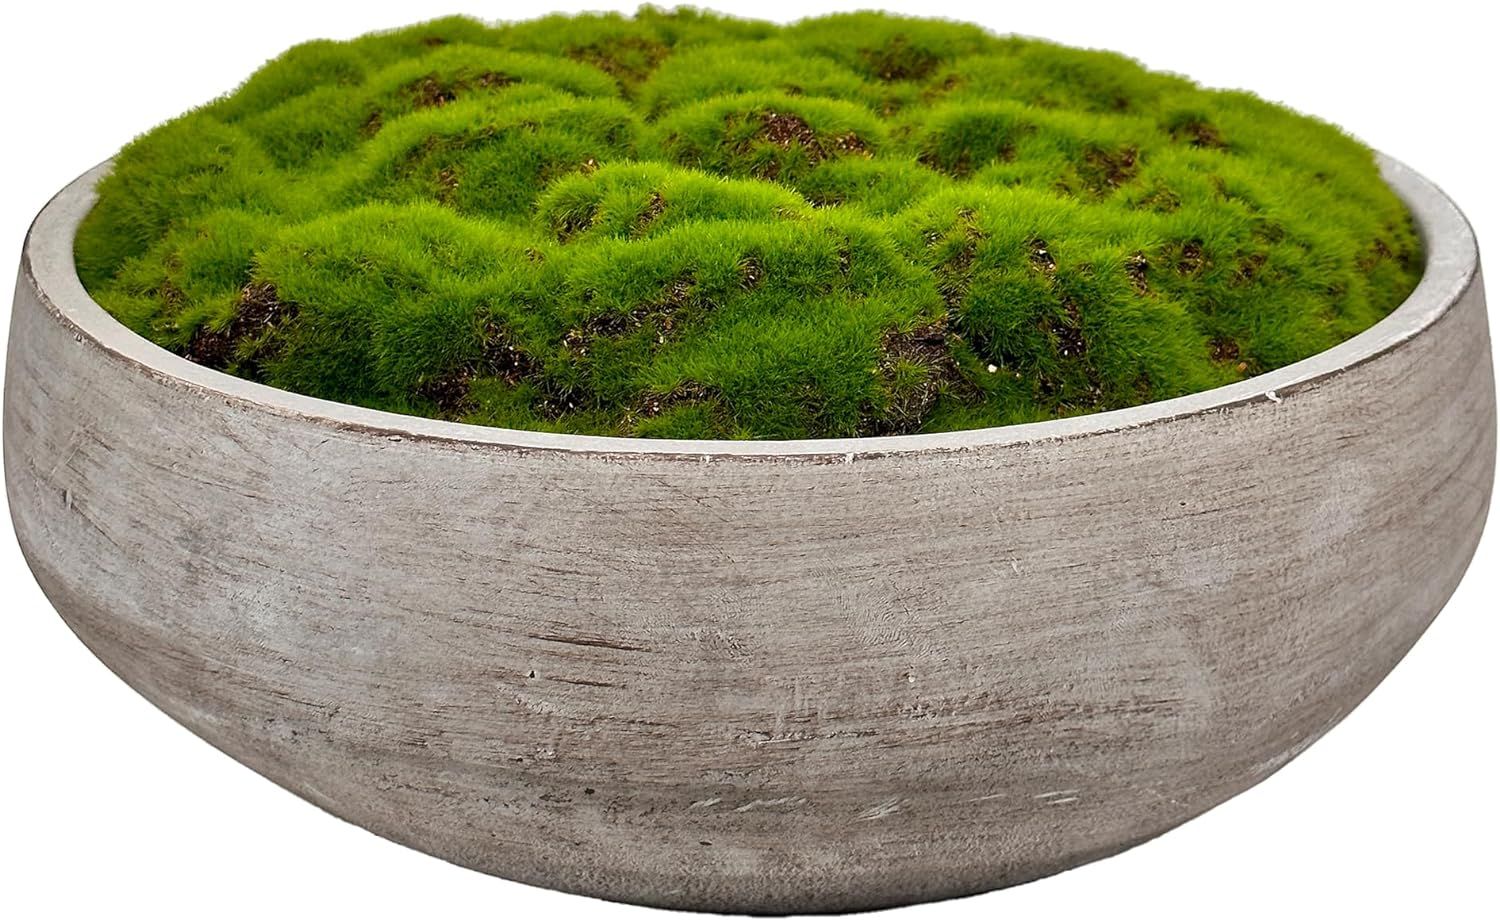 Macomine Design Newly Released Moss Bowl |12" Diameter | Artificial | Hand-Painted Cement Bowl | ... | Amazon (US)